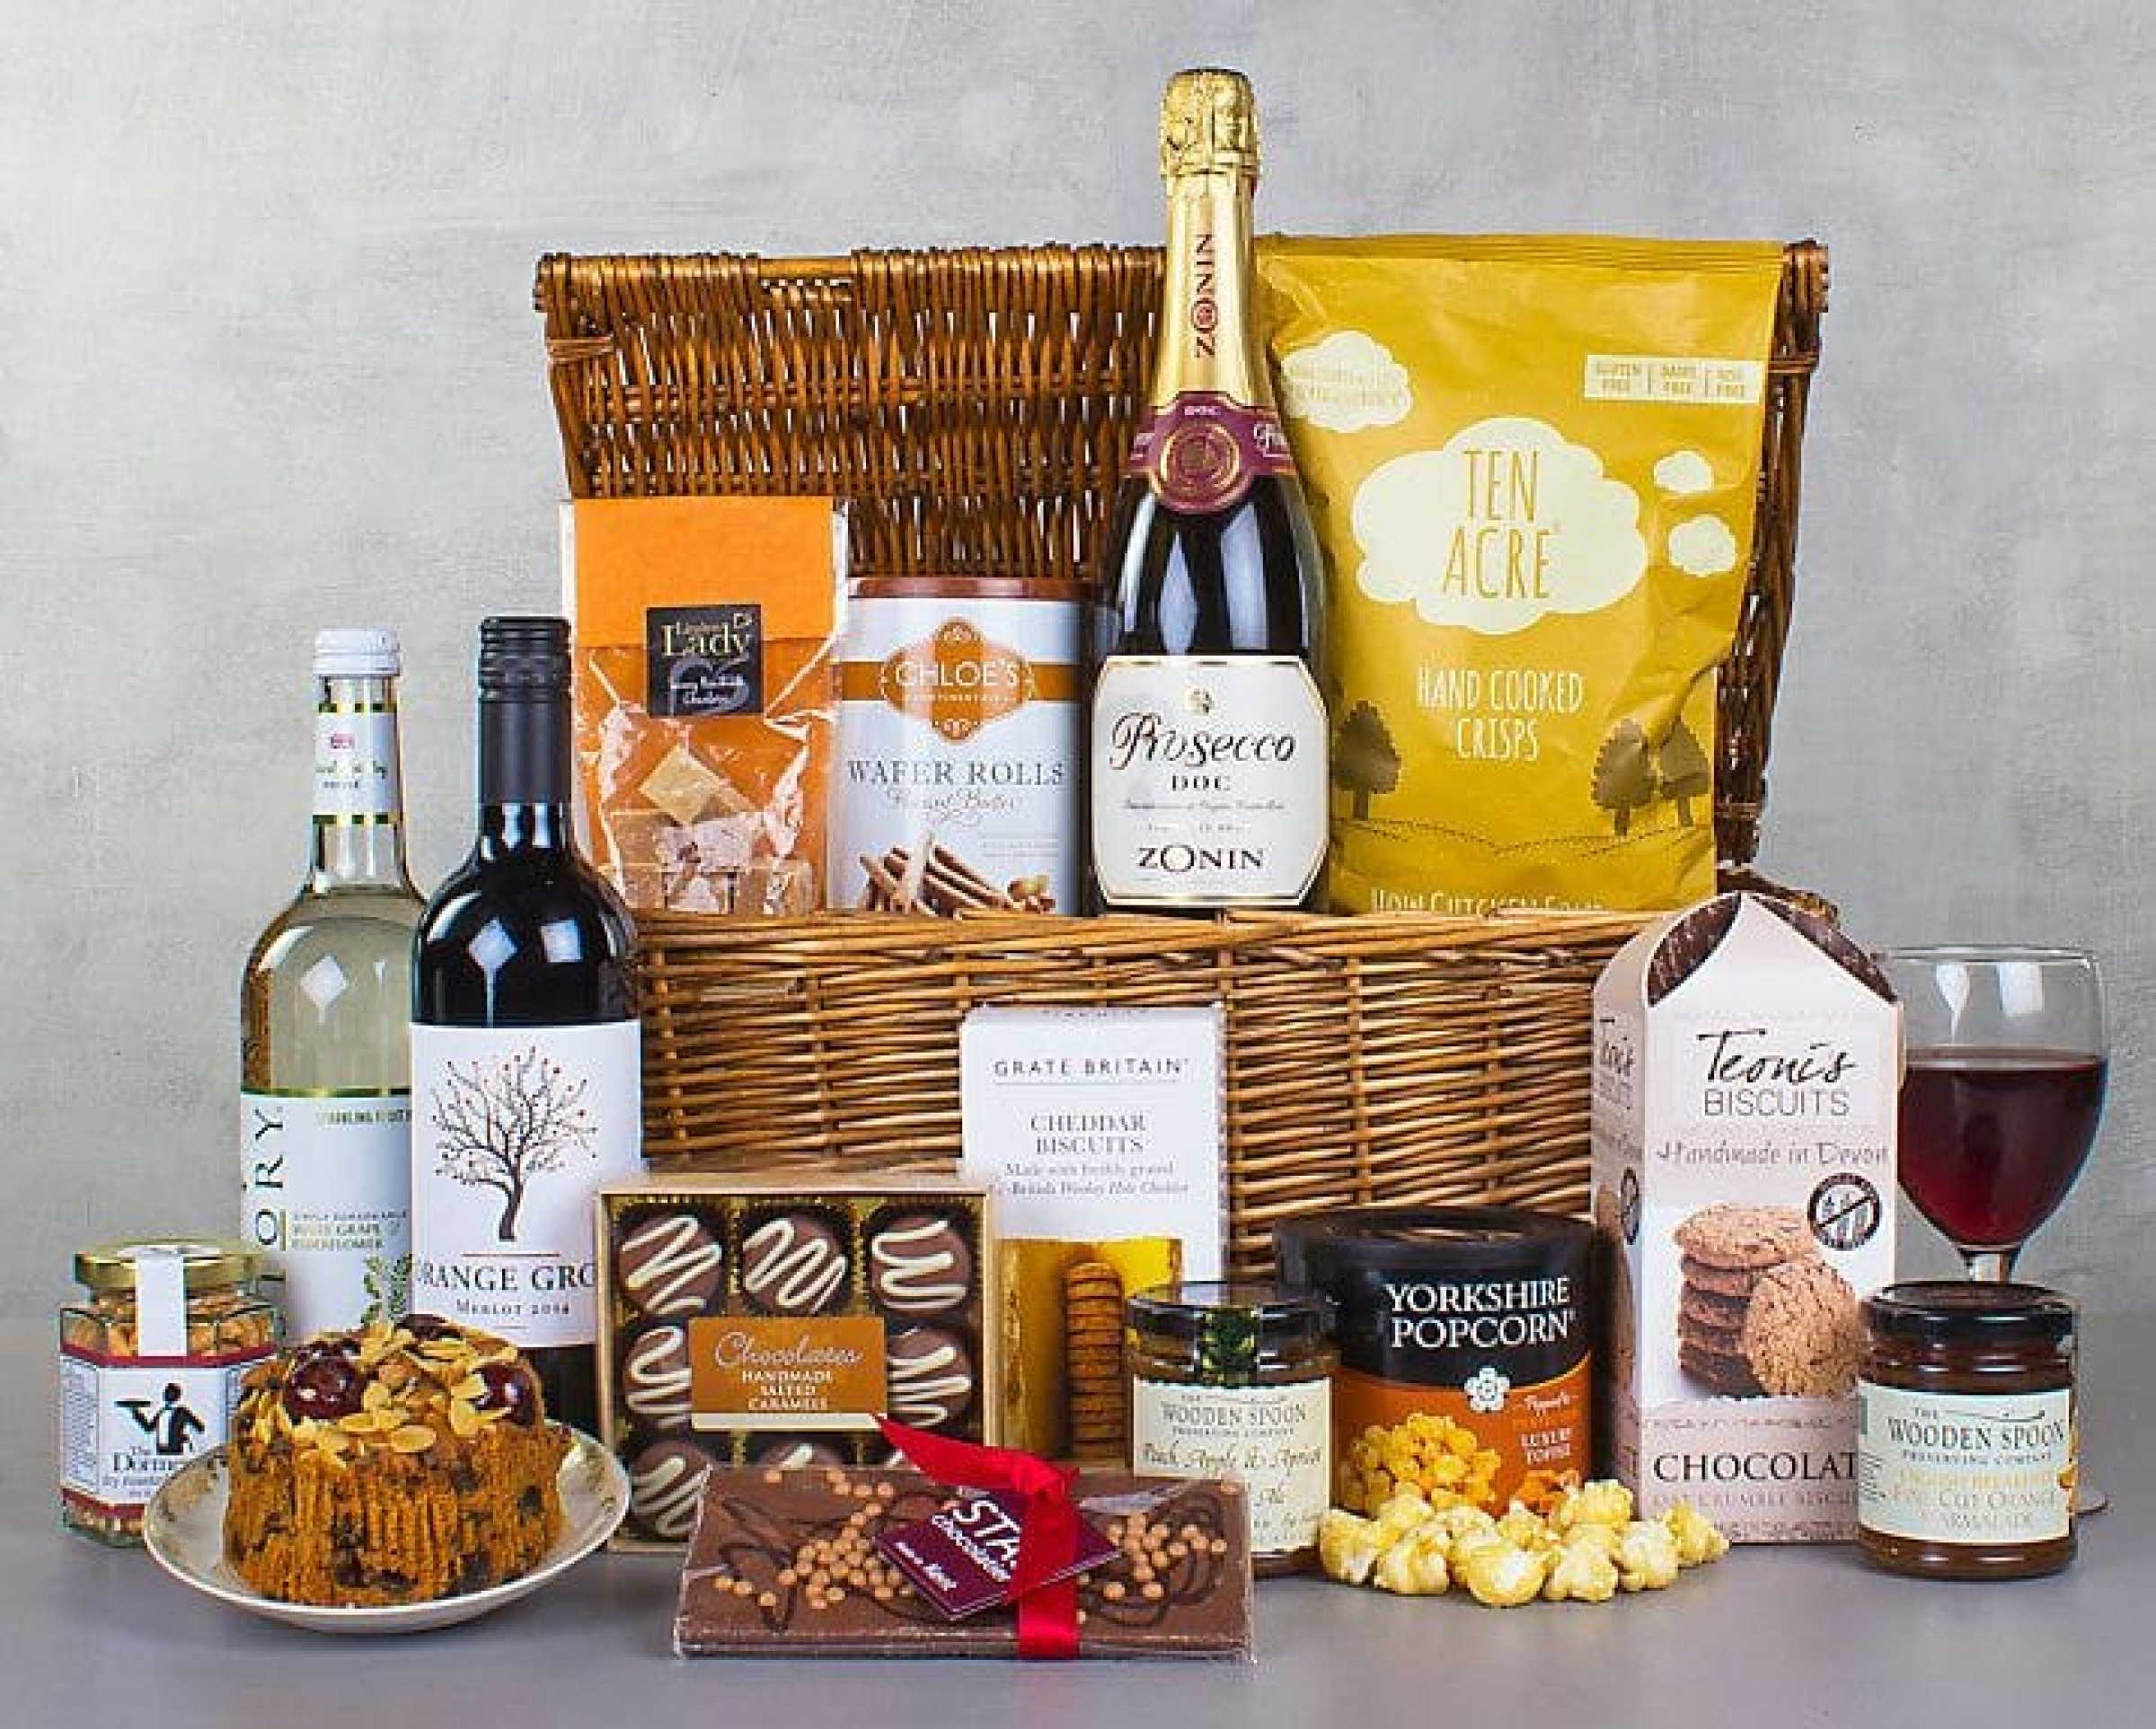 Win a hamper and tickets for the Lancashire Game and Country Festival